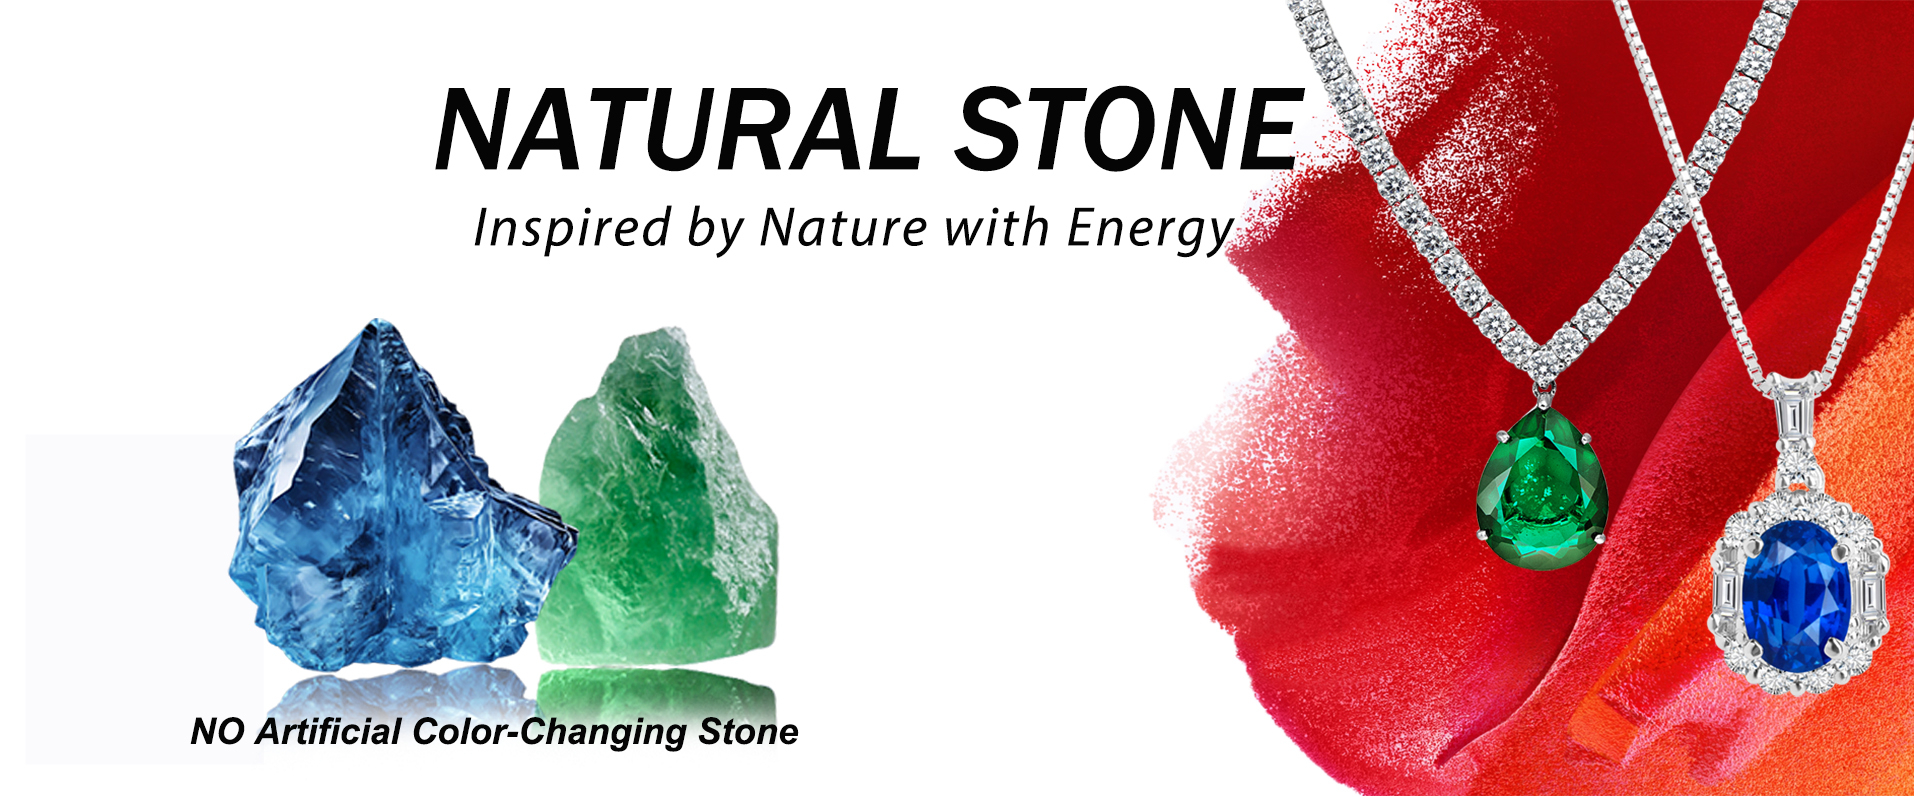 Votum Natural Stone Brings You Positive Energy. 